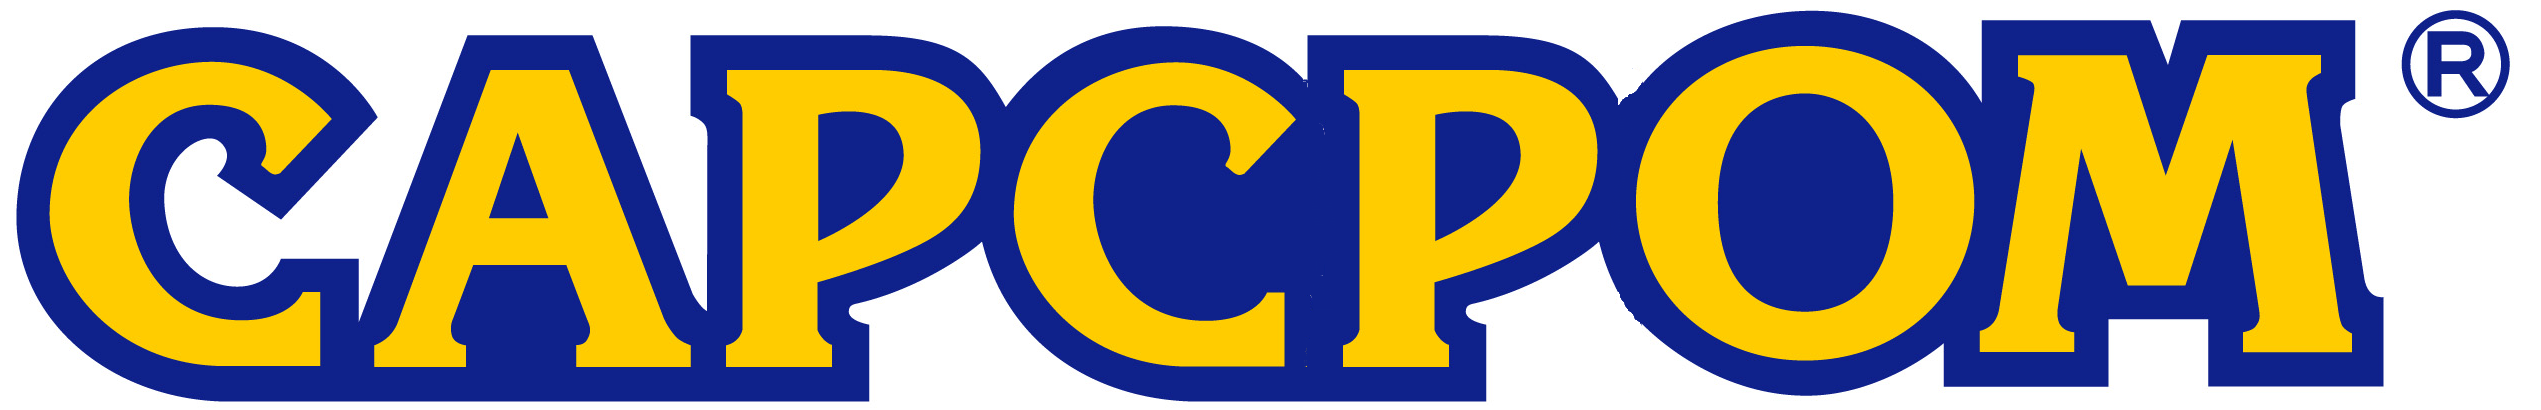 capcpom-logo.png